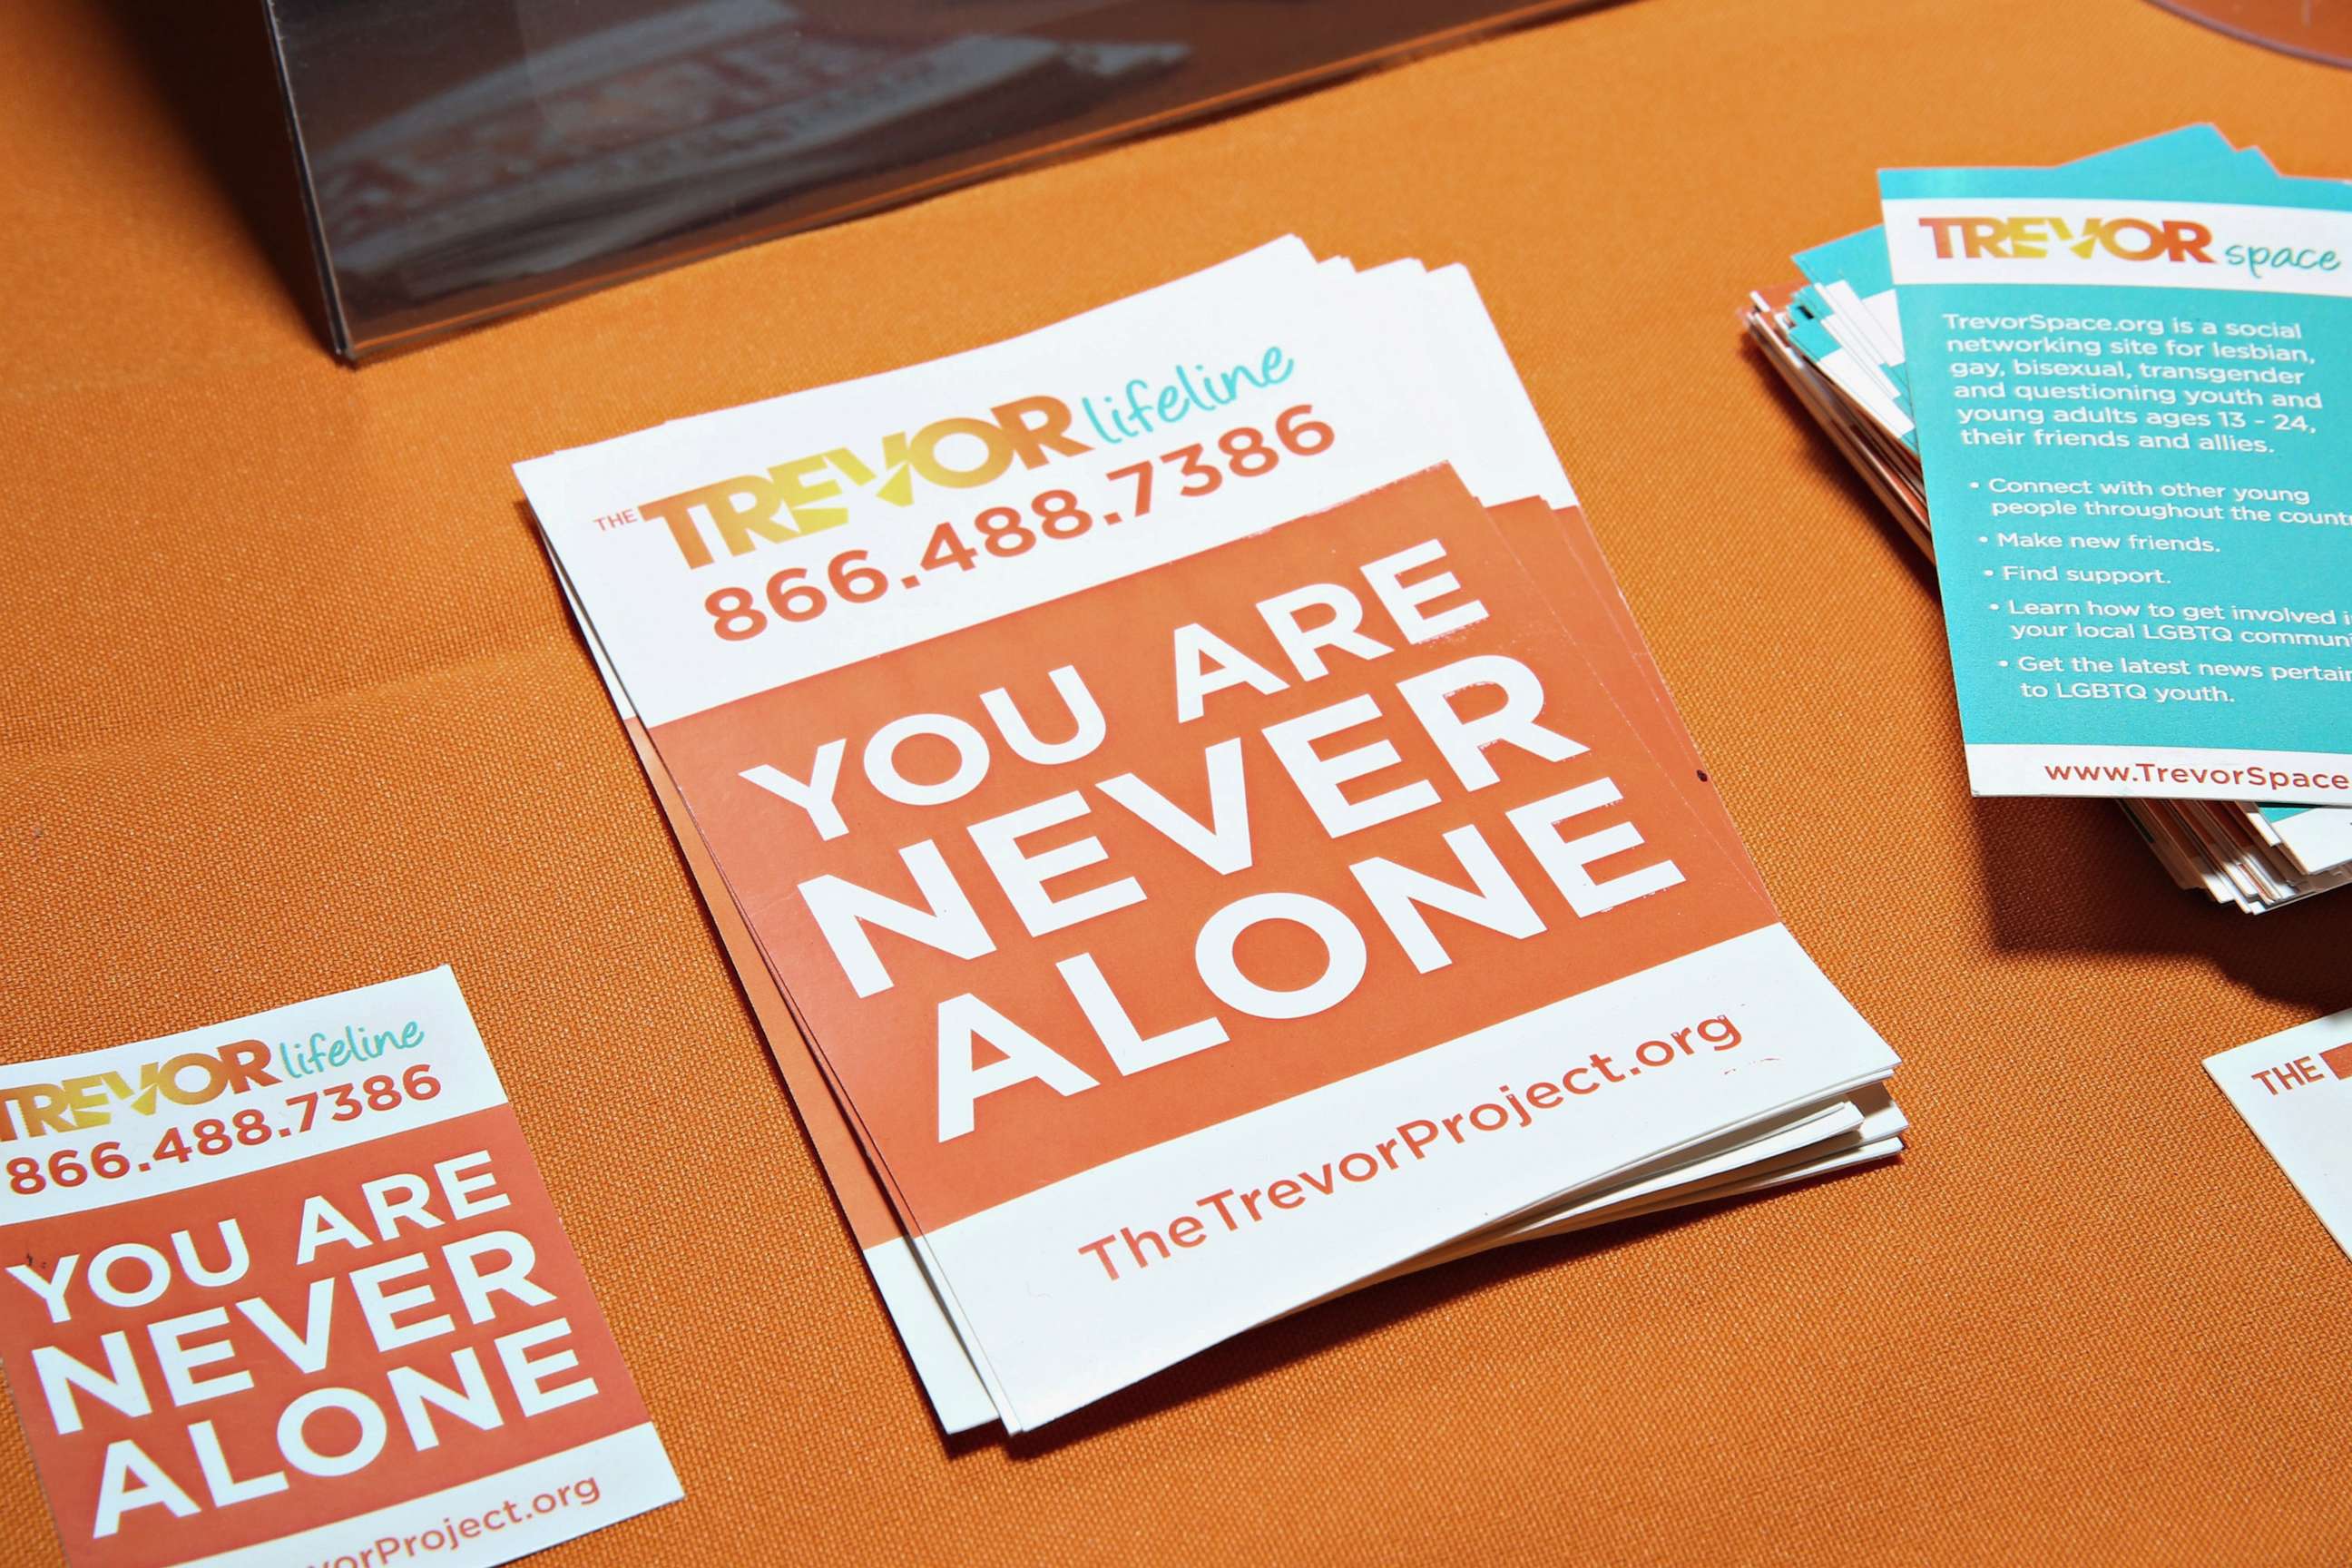 PHOTO: Pamphlets for attendees at The Trevor Project's NextGen Spring Flin, April 17, 2015, in New York City.